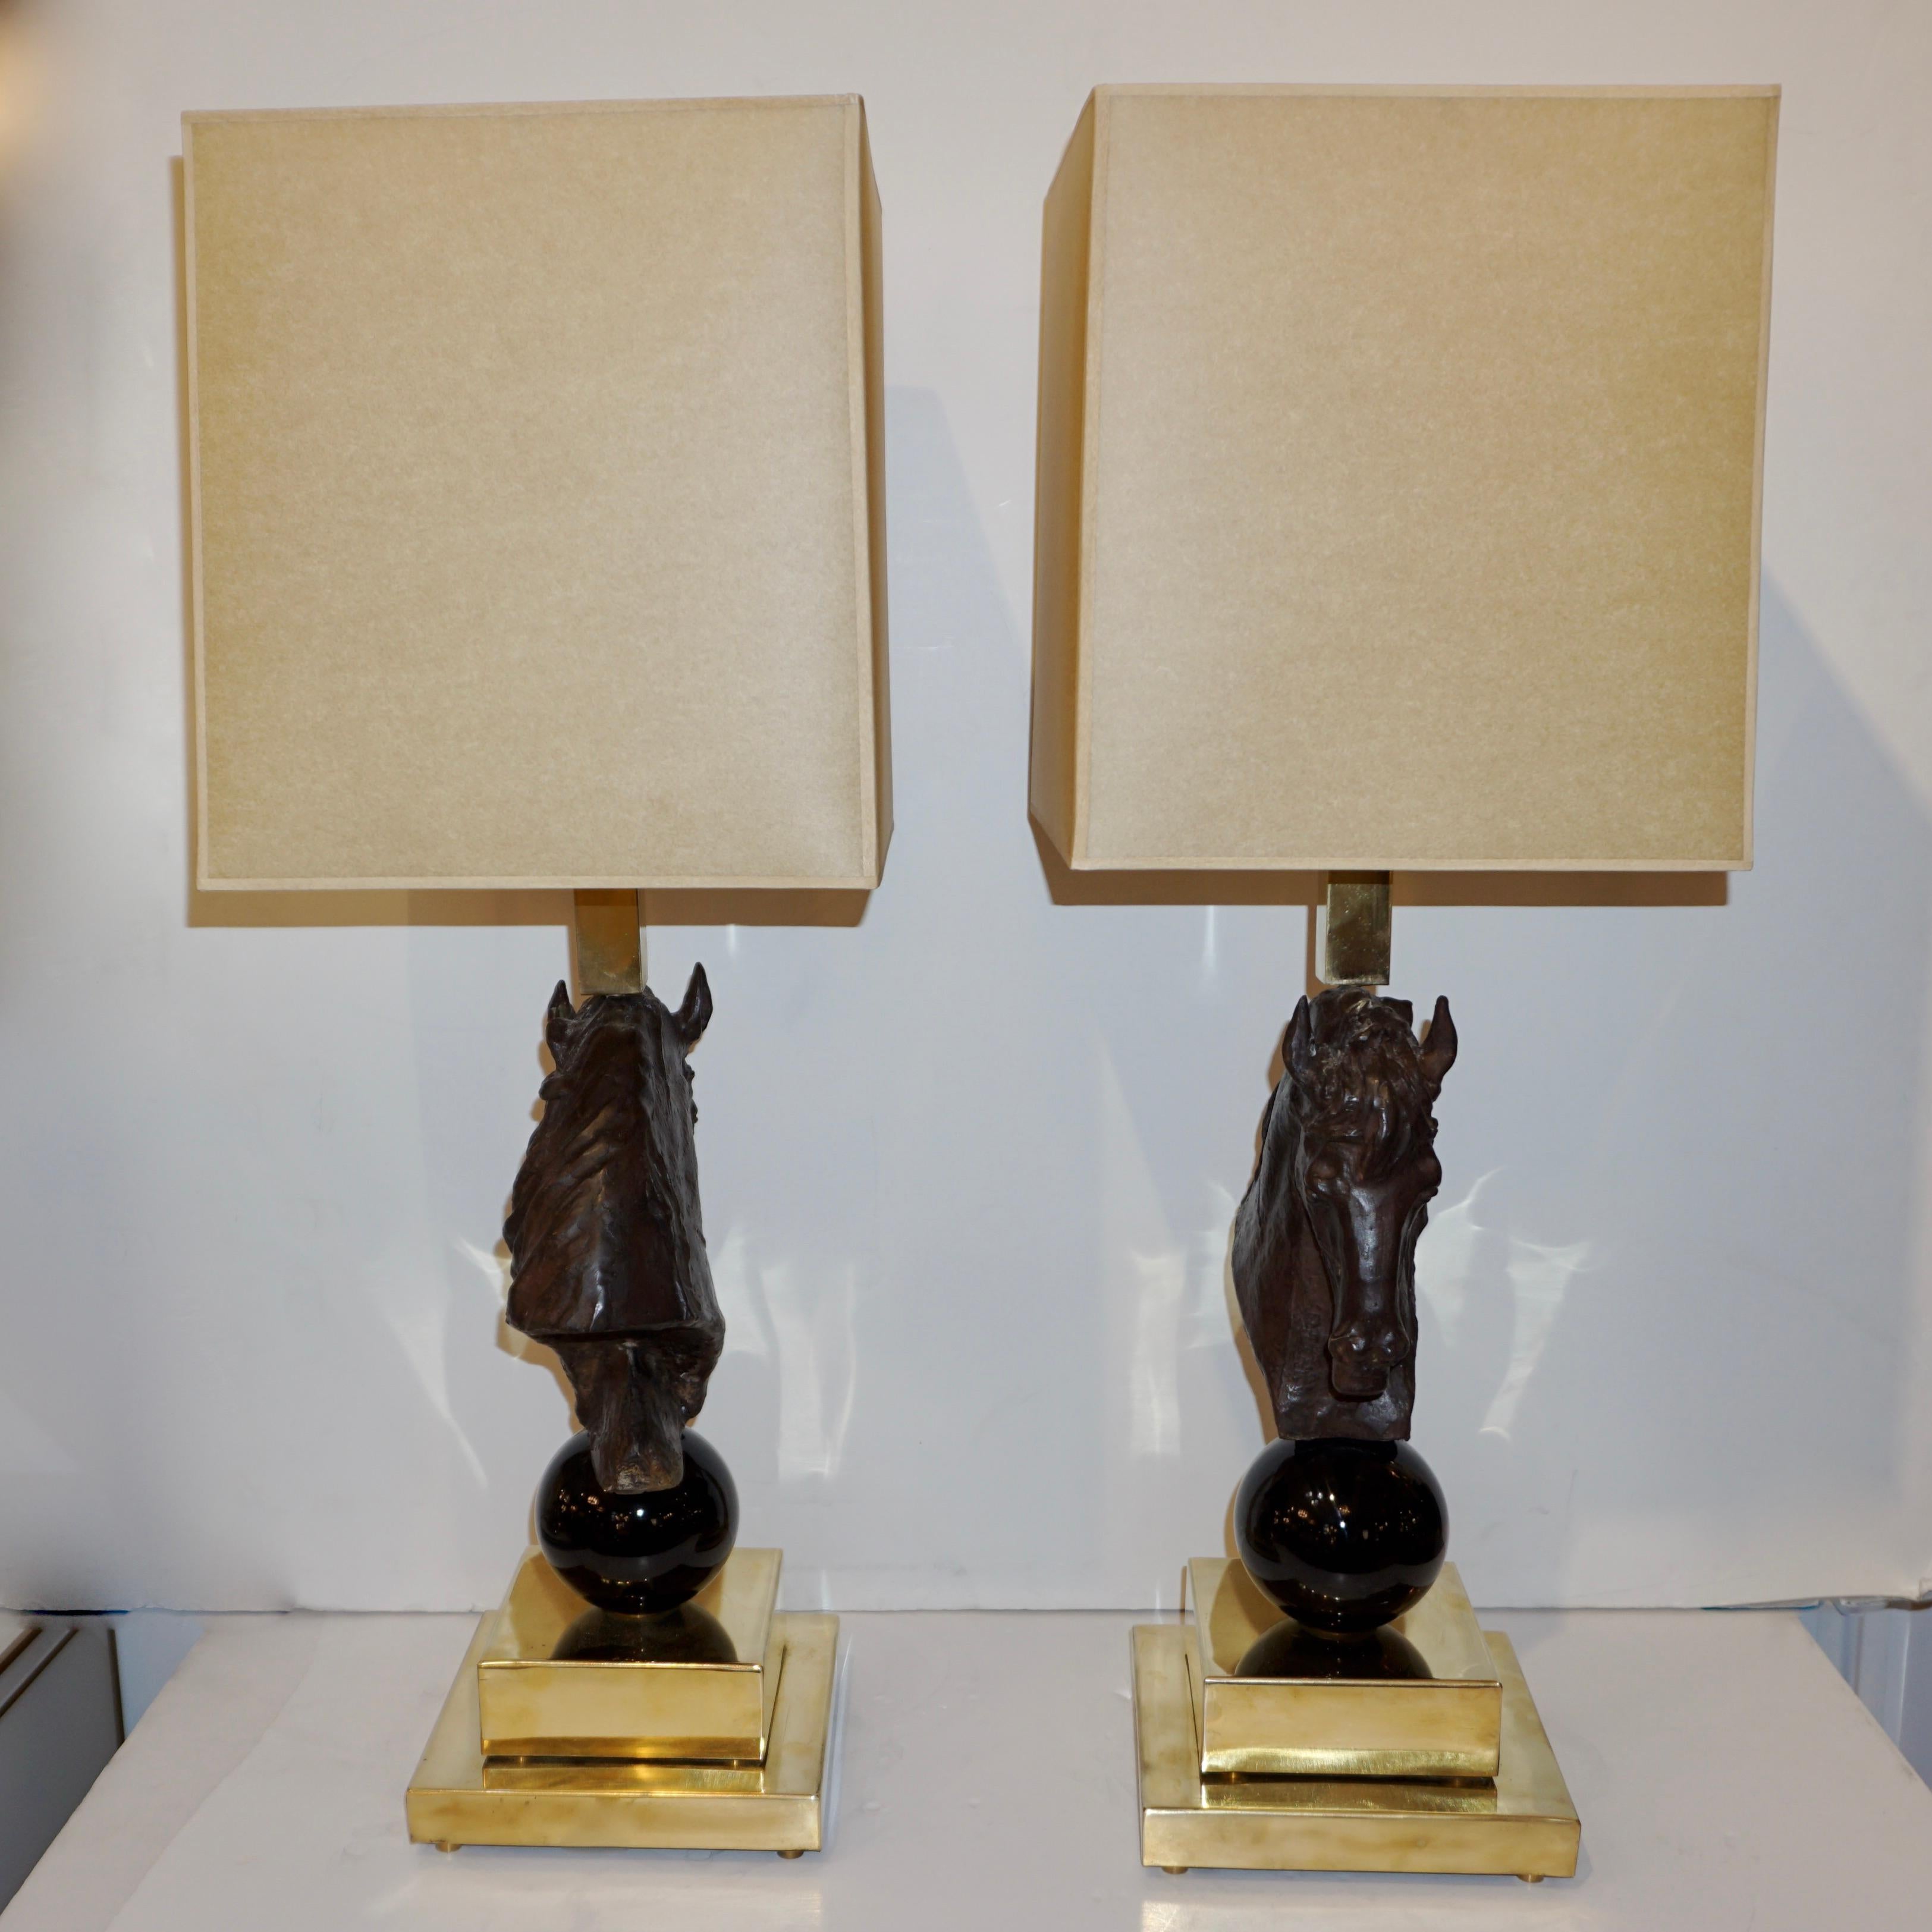 Italian design 1990s brass lamps, elegant and sculptural for Hollywood Regency interiors. A piece of art bronze sculpture of a horse head, with intricate detailing in the horse mane and facial expression, brings these lamps to life. The animal head